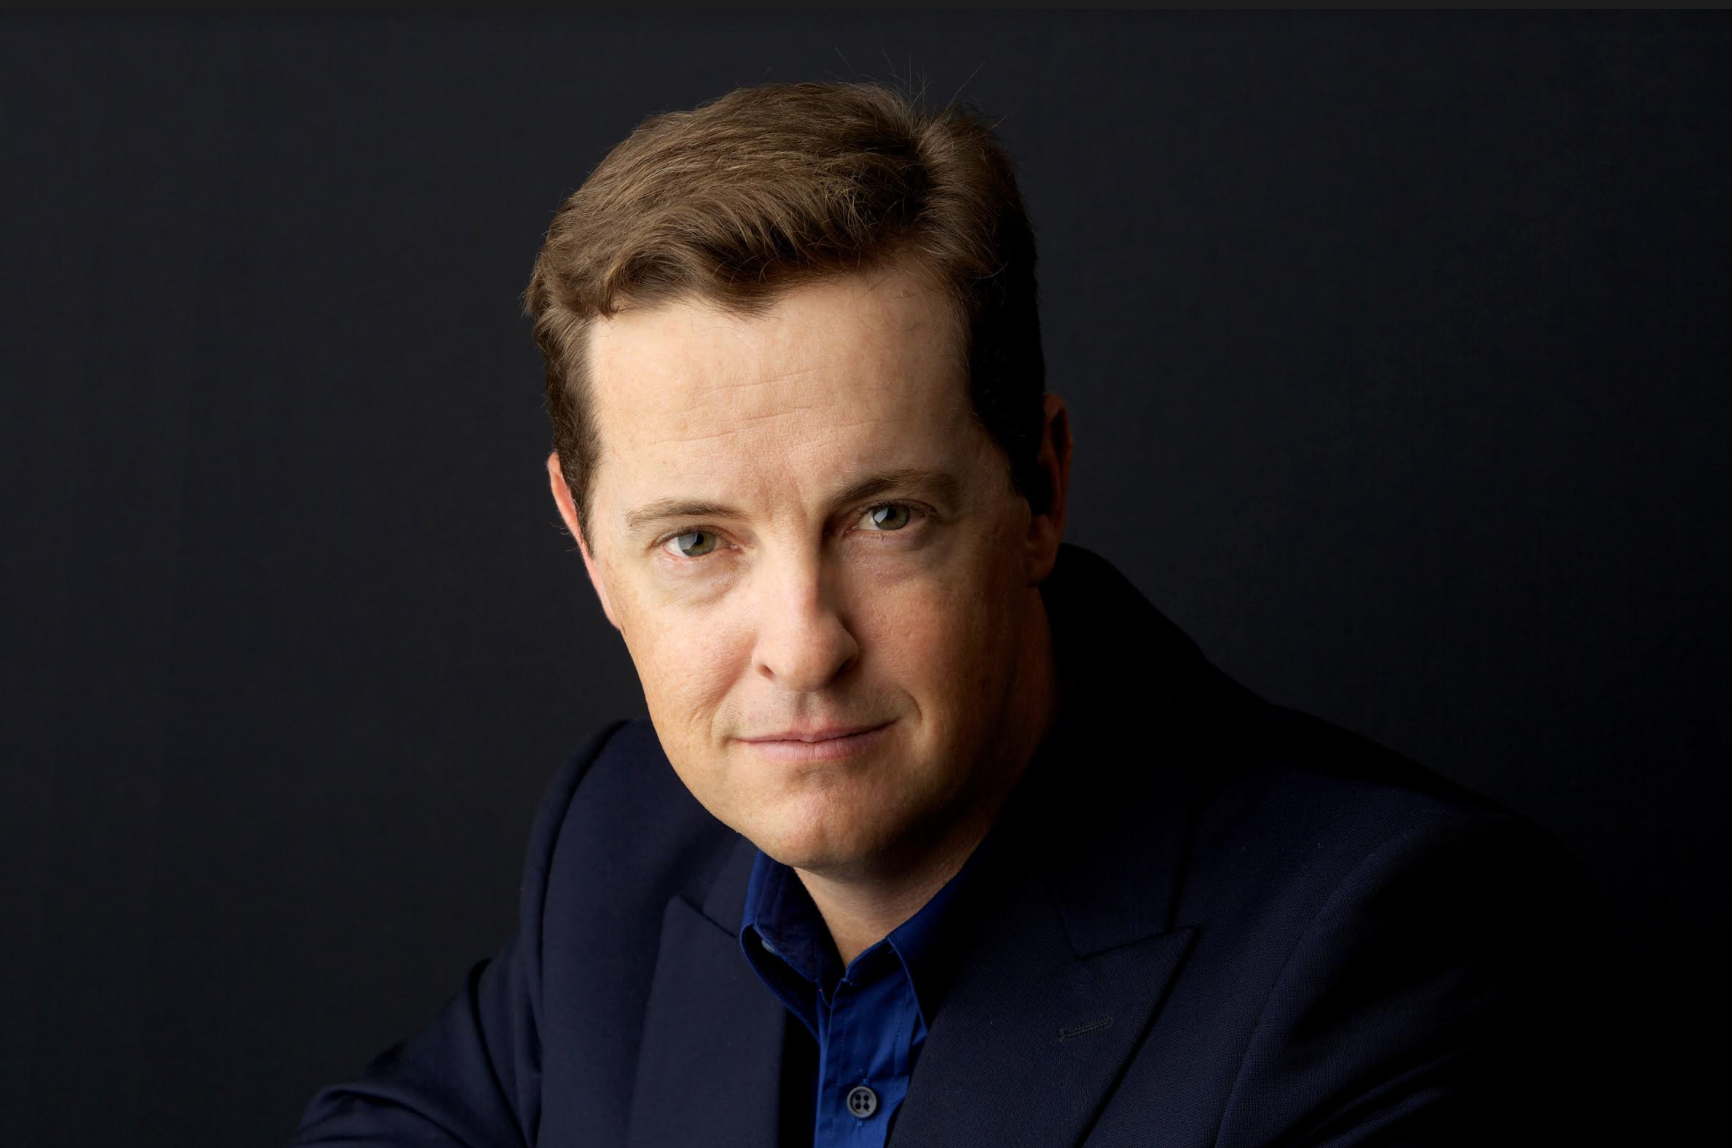 ­MATTHEW REILLY: BESTSELLING AUTHOR